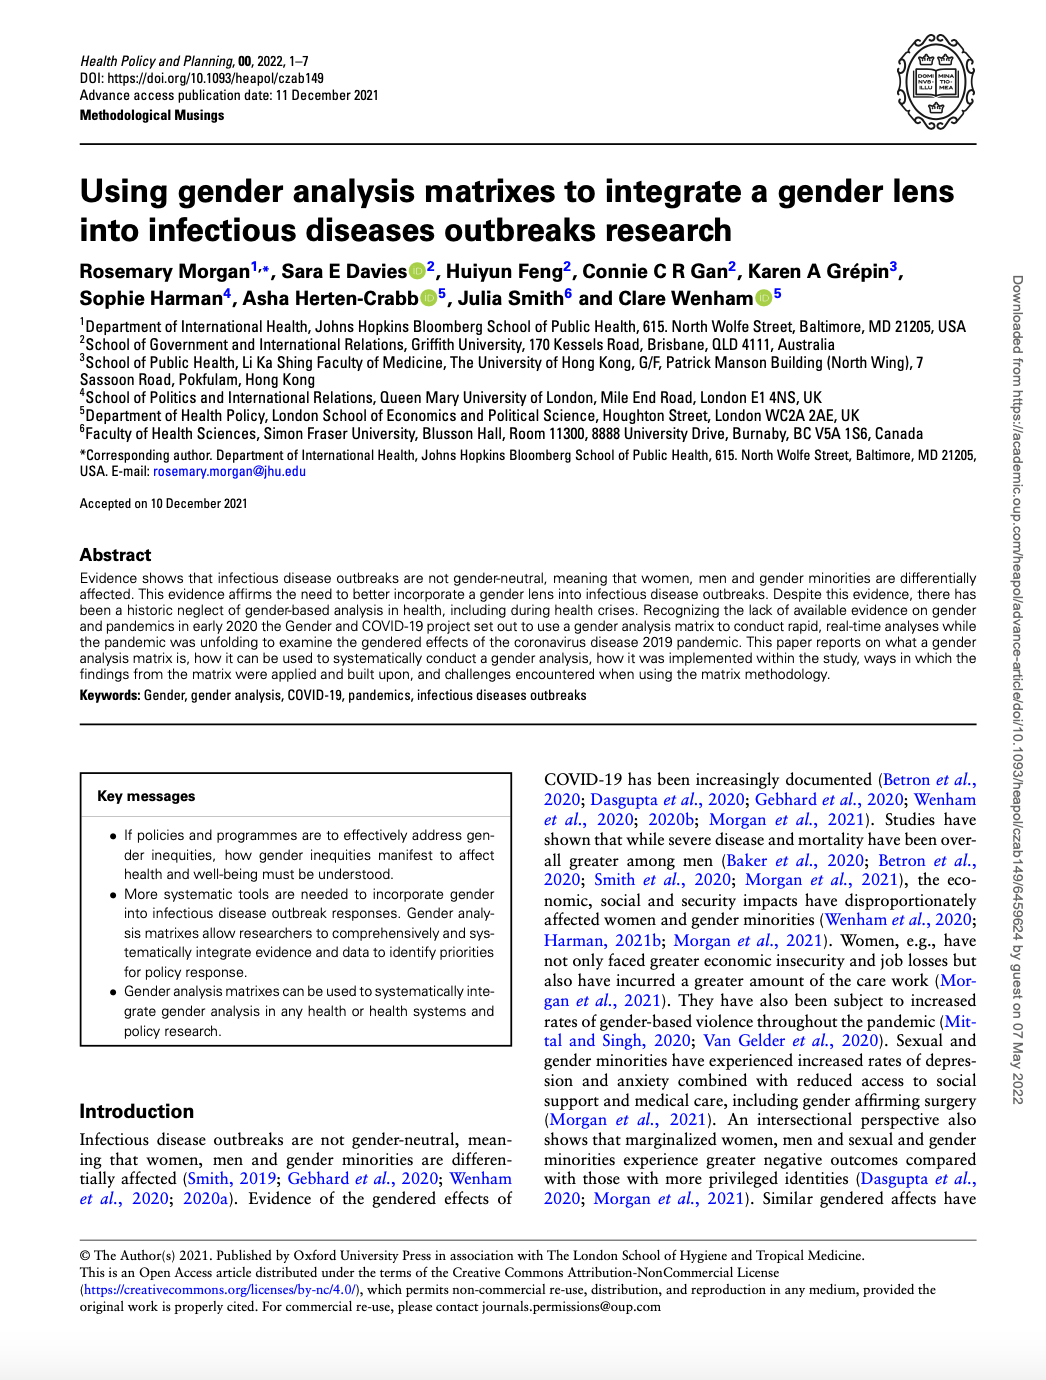 Using Gender Analysis Matrixes to Integrate a Gender Lens Into Infectious Diseases Outbreaks Research